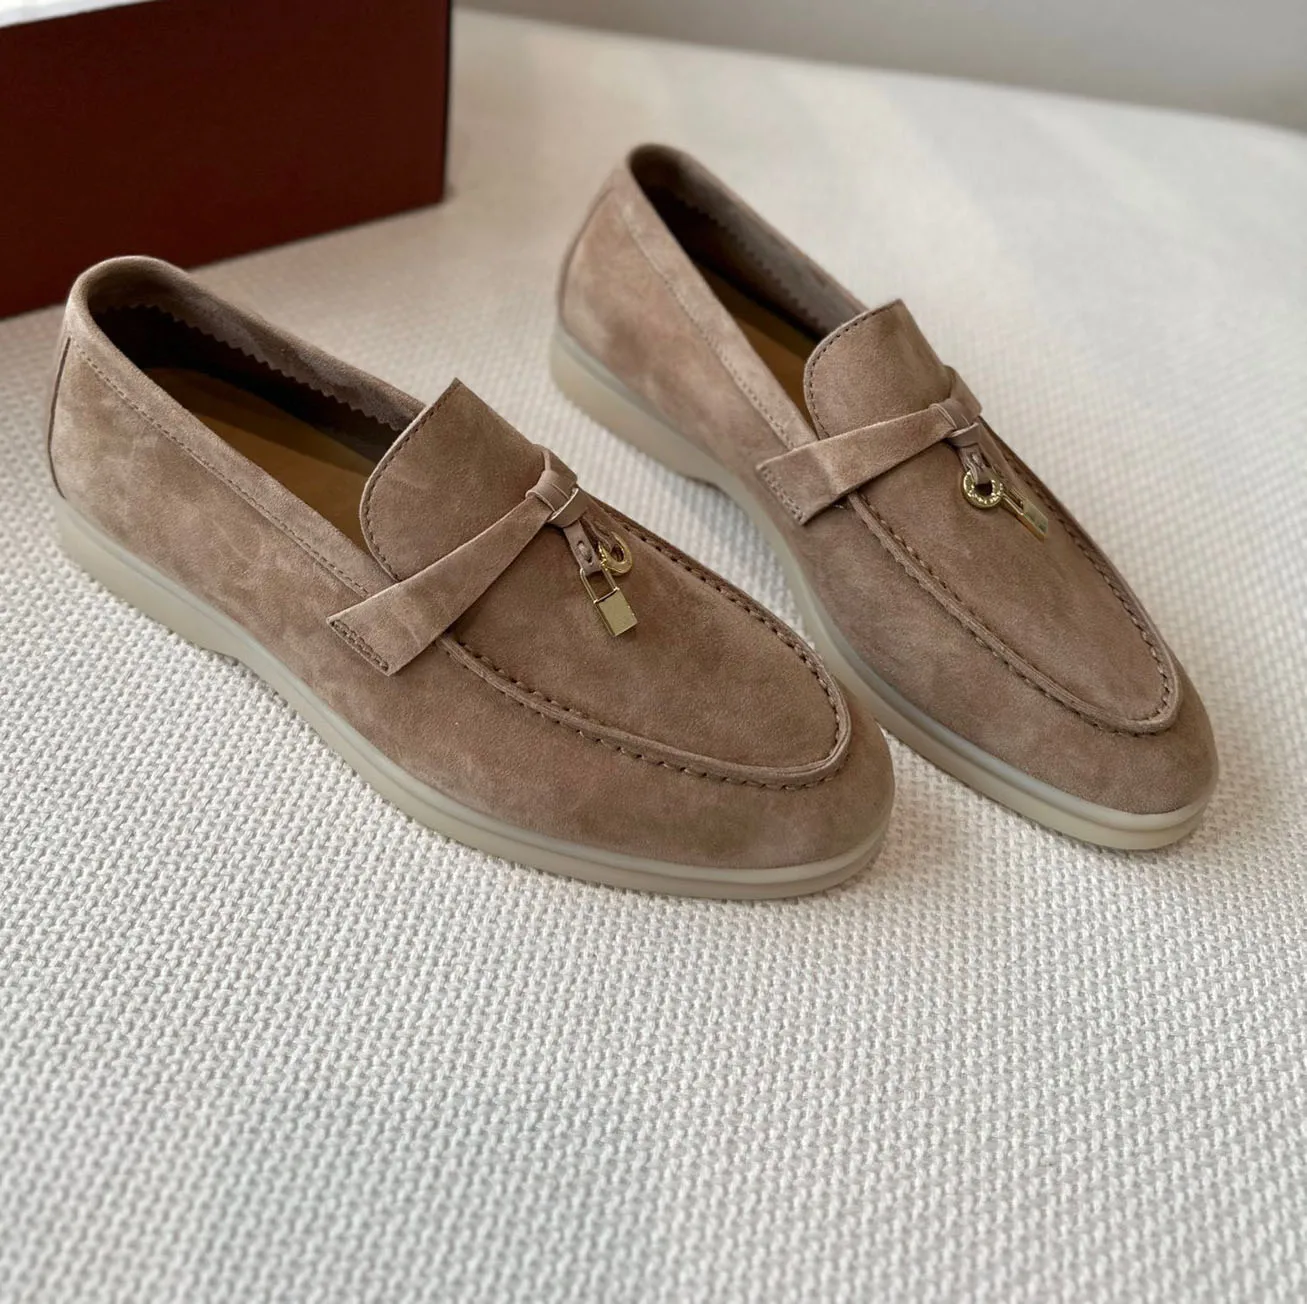 2024 Loafers Summer Walk Charms Suede Shoes Sneakers Brown Suede Leather Flats Women Brand High Quality faishion Shoes